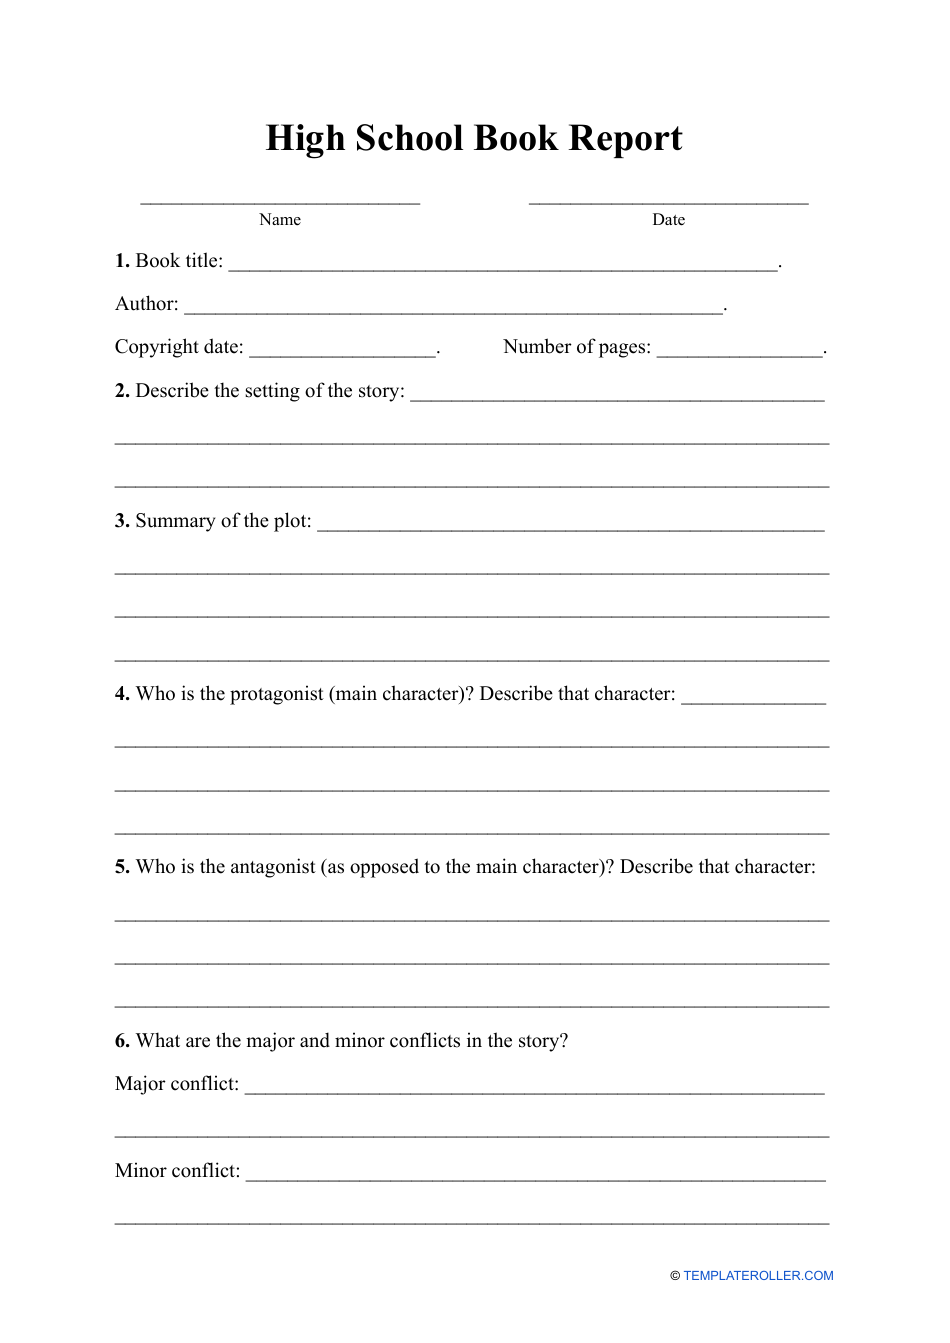 High School Book Report Template, Page 1